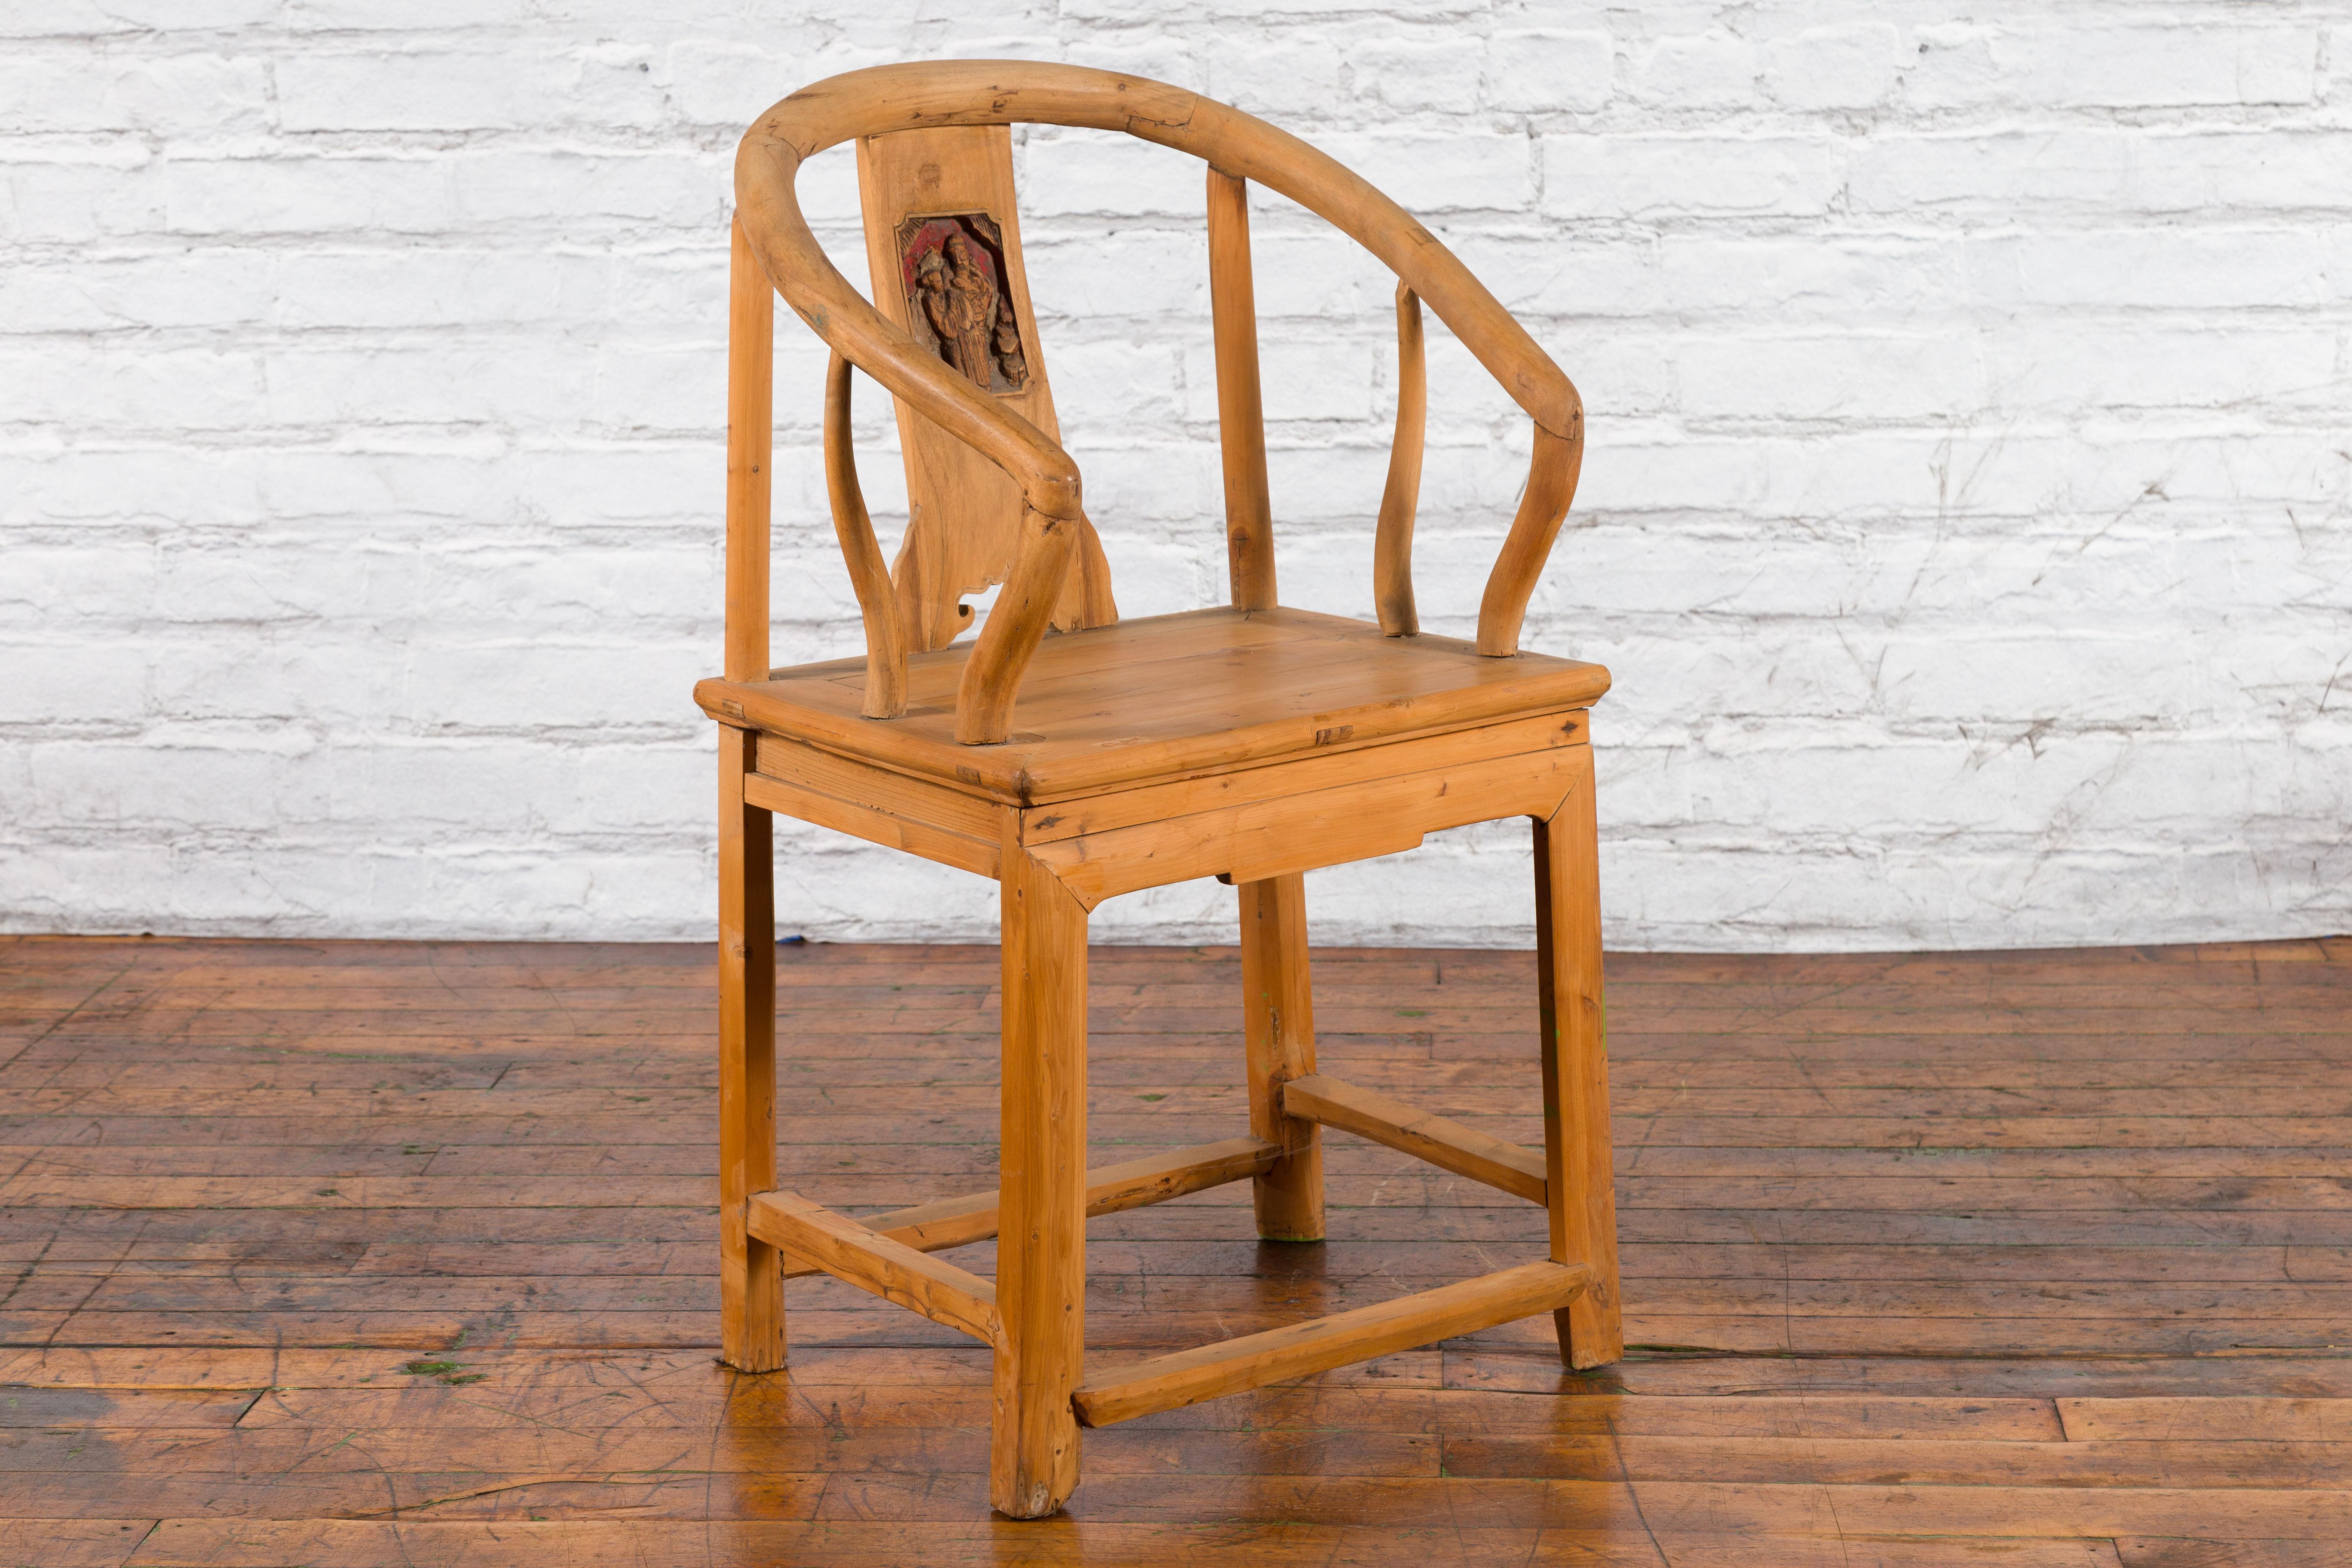 A Chinese Qing Dynasty period elmwood horseshoe back chair from the 19th century, with hand-carved medallion and natural patina. Created in China during the Qing Dynasty, this elmwood chair features a horseshoe back carved with characters standing